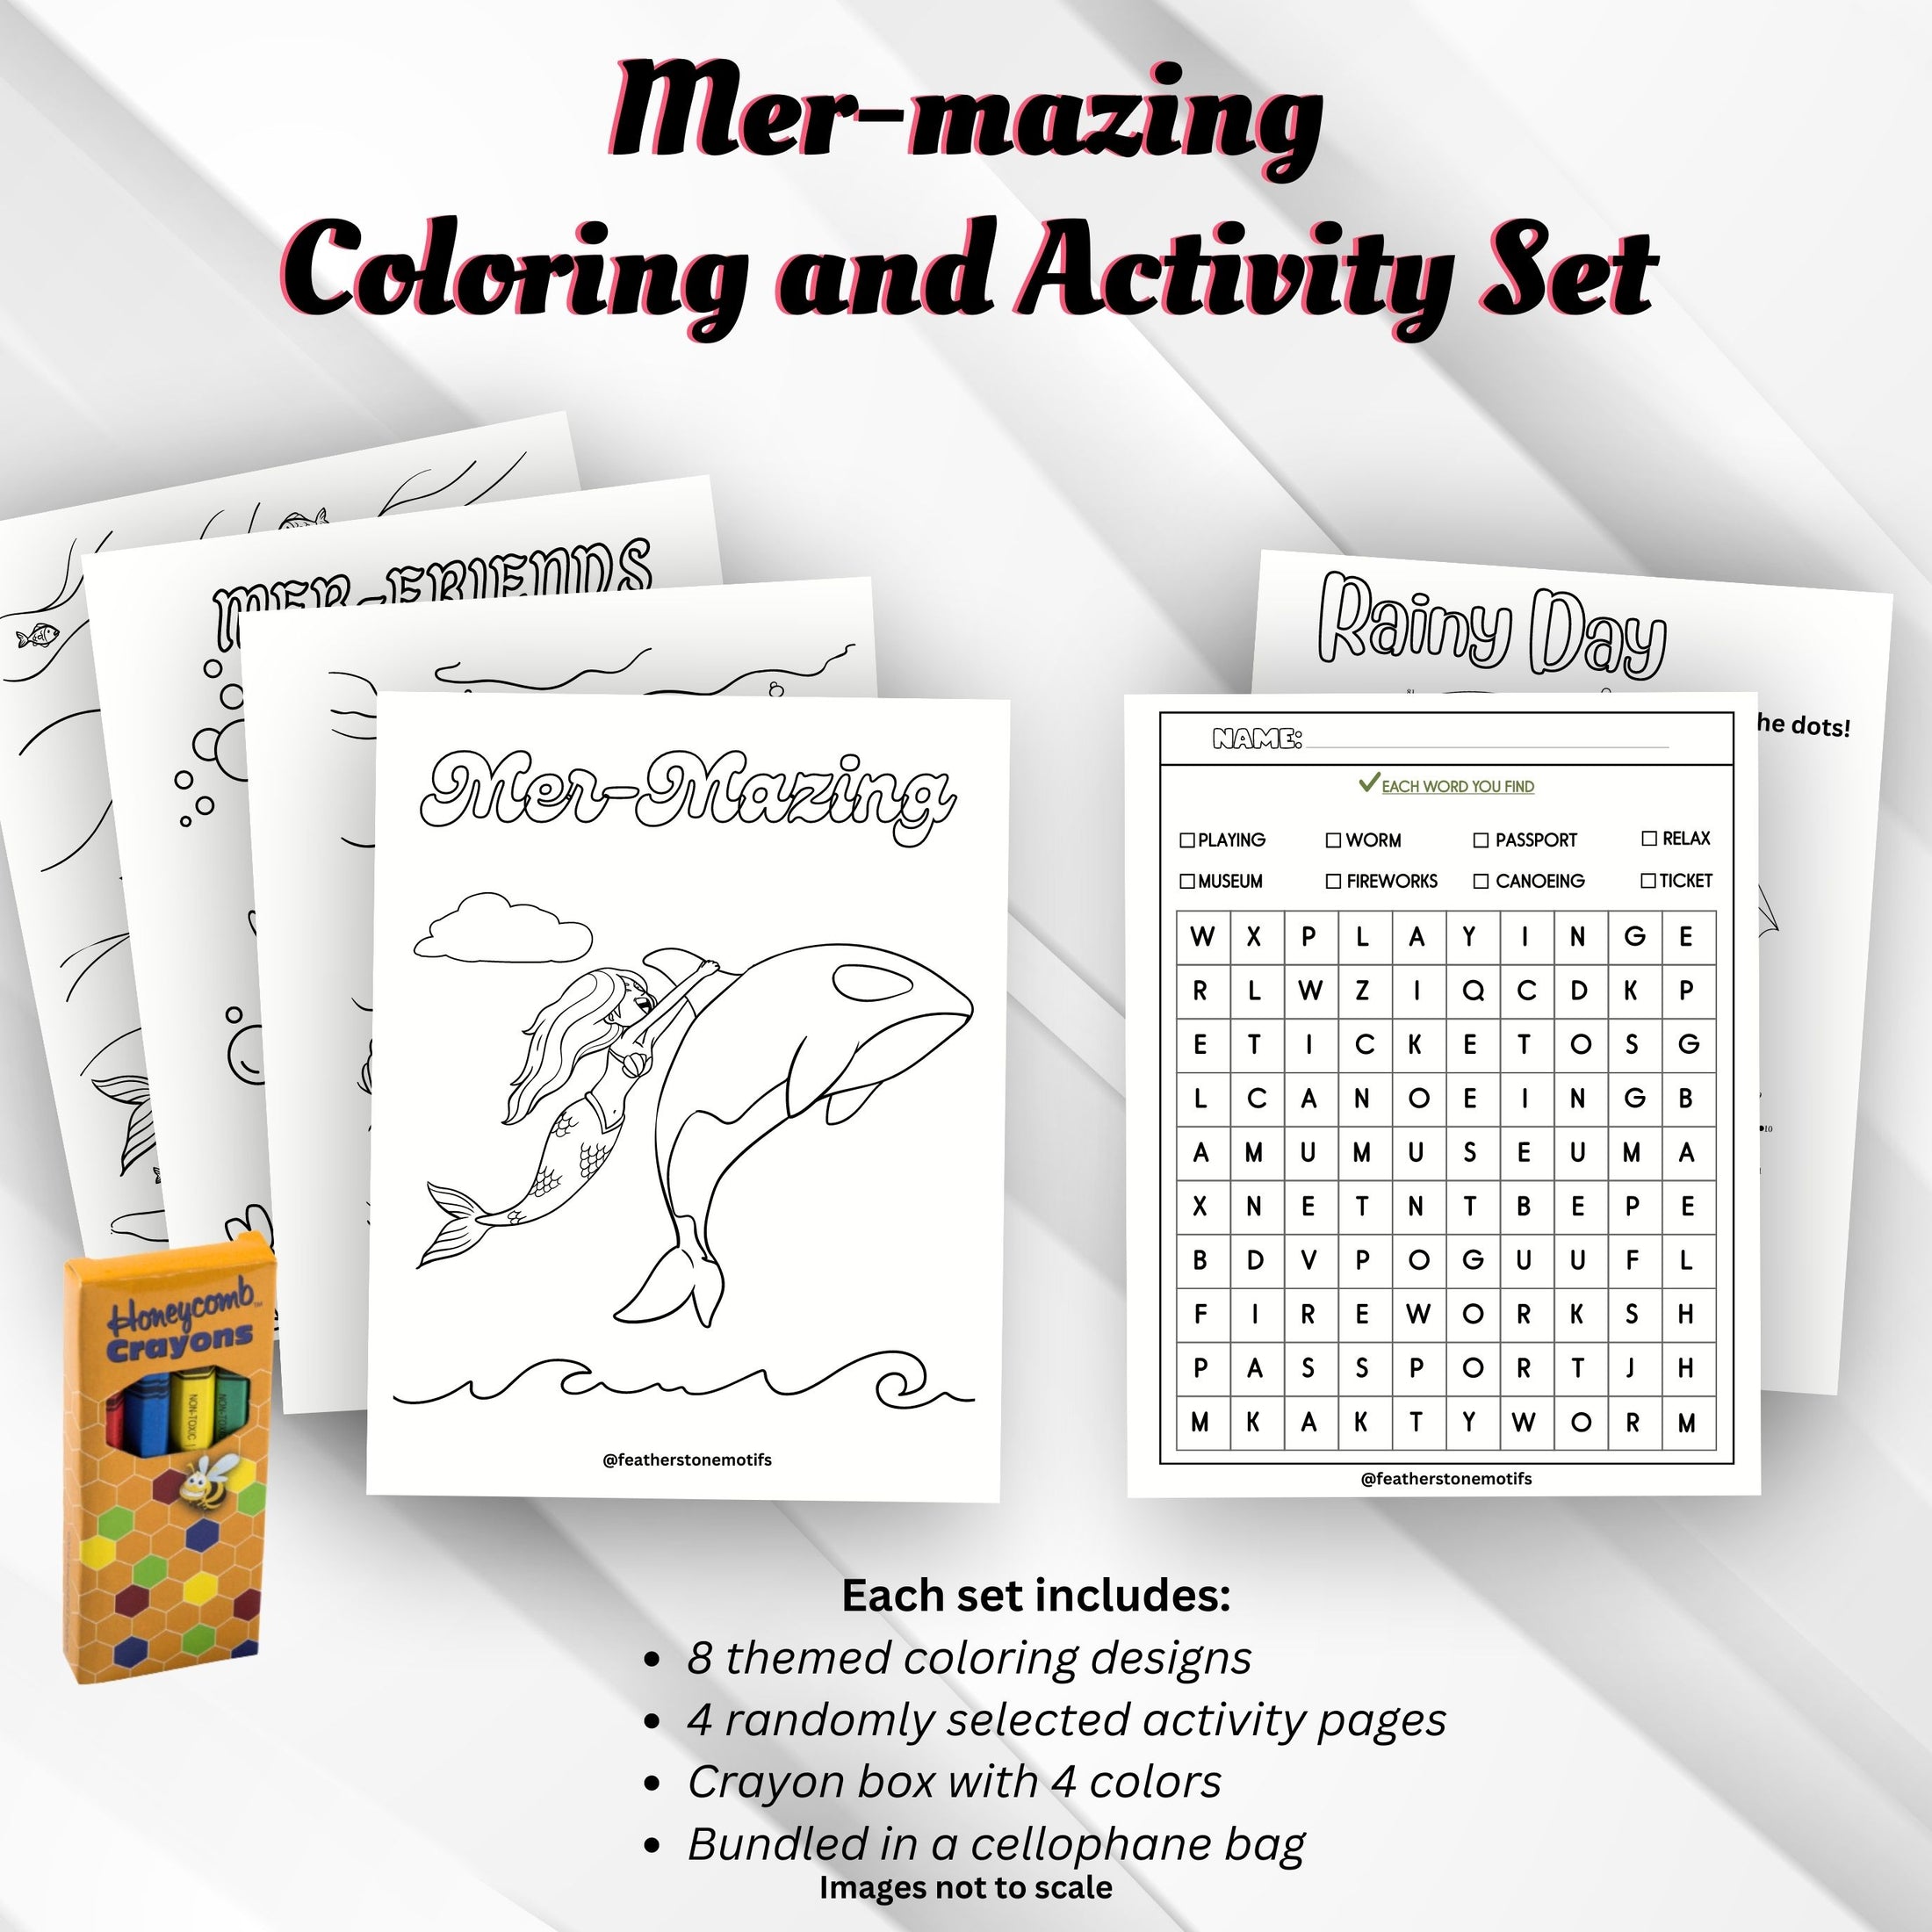 This image shows the Mermaids Coloring and Activity set with coloring pages, activity pages, and crayons.